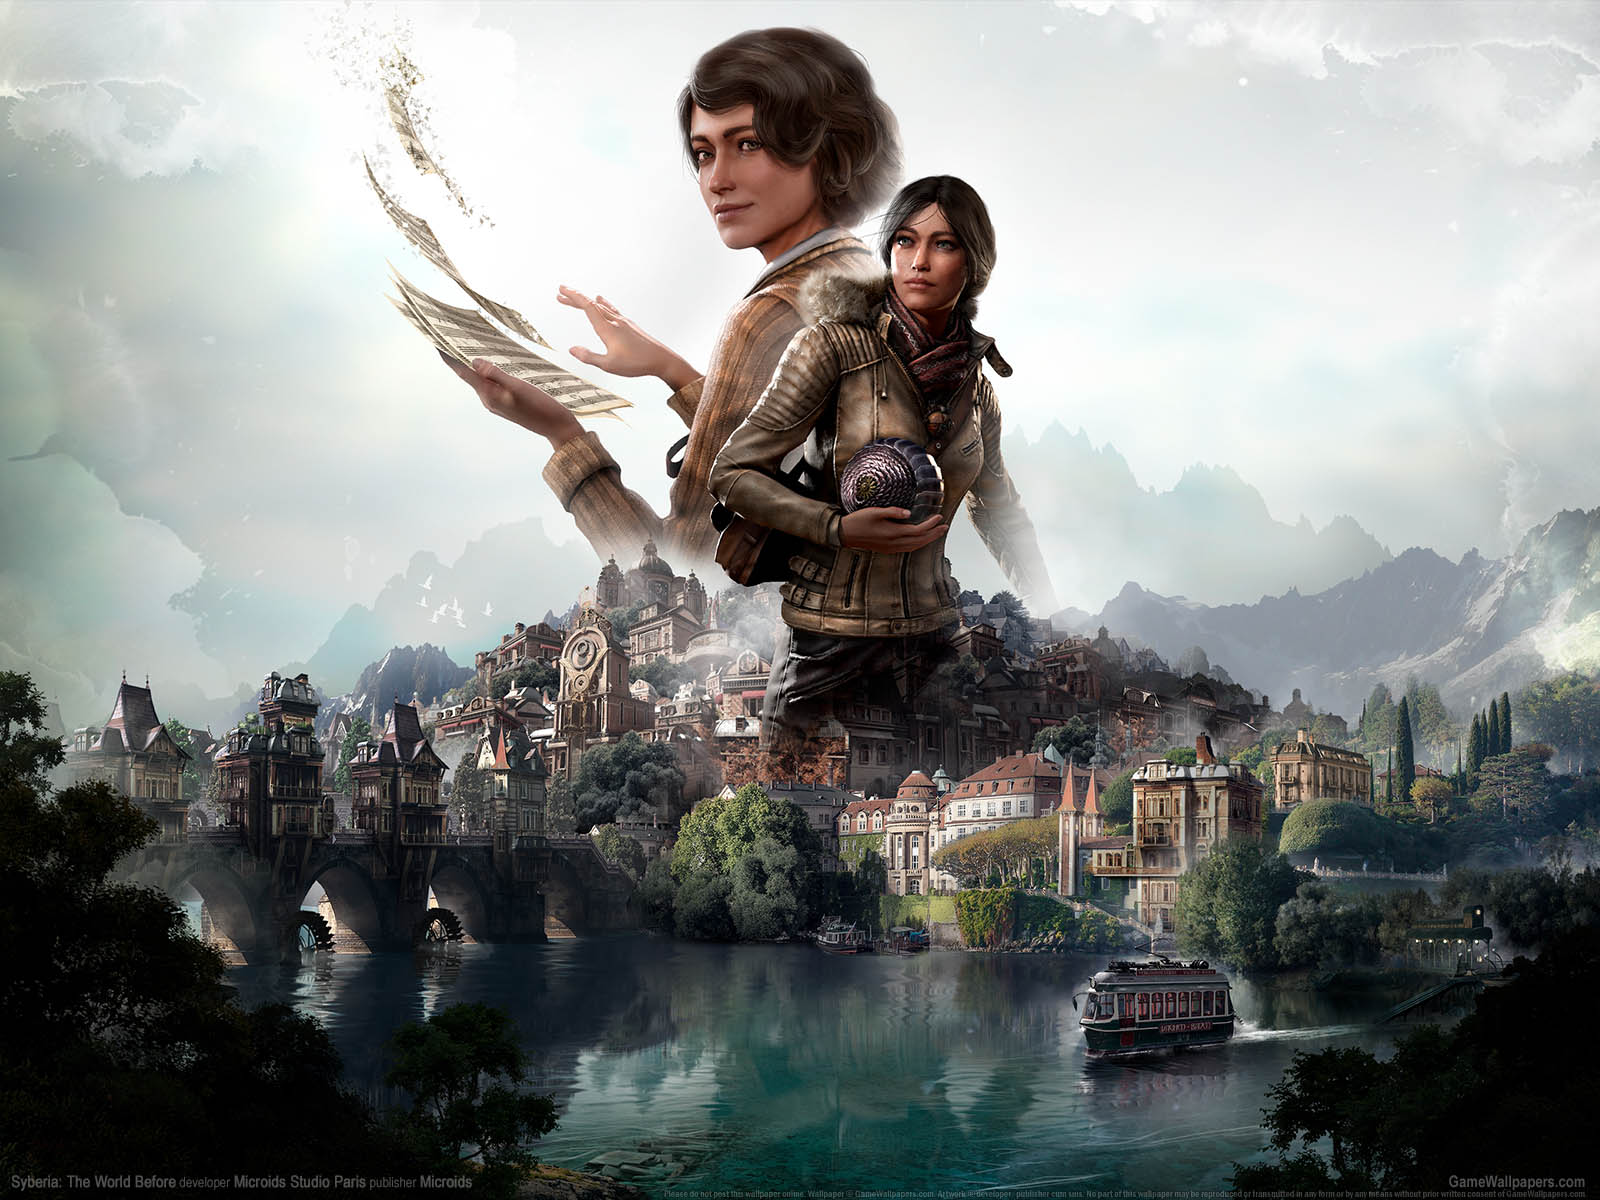 Syberia%253A The World Before wallpaper 01 1600x1200